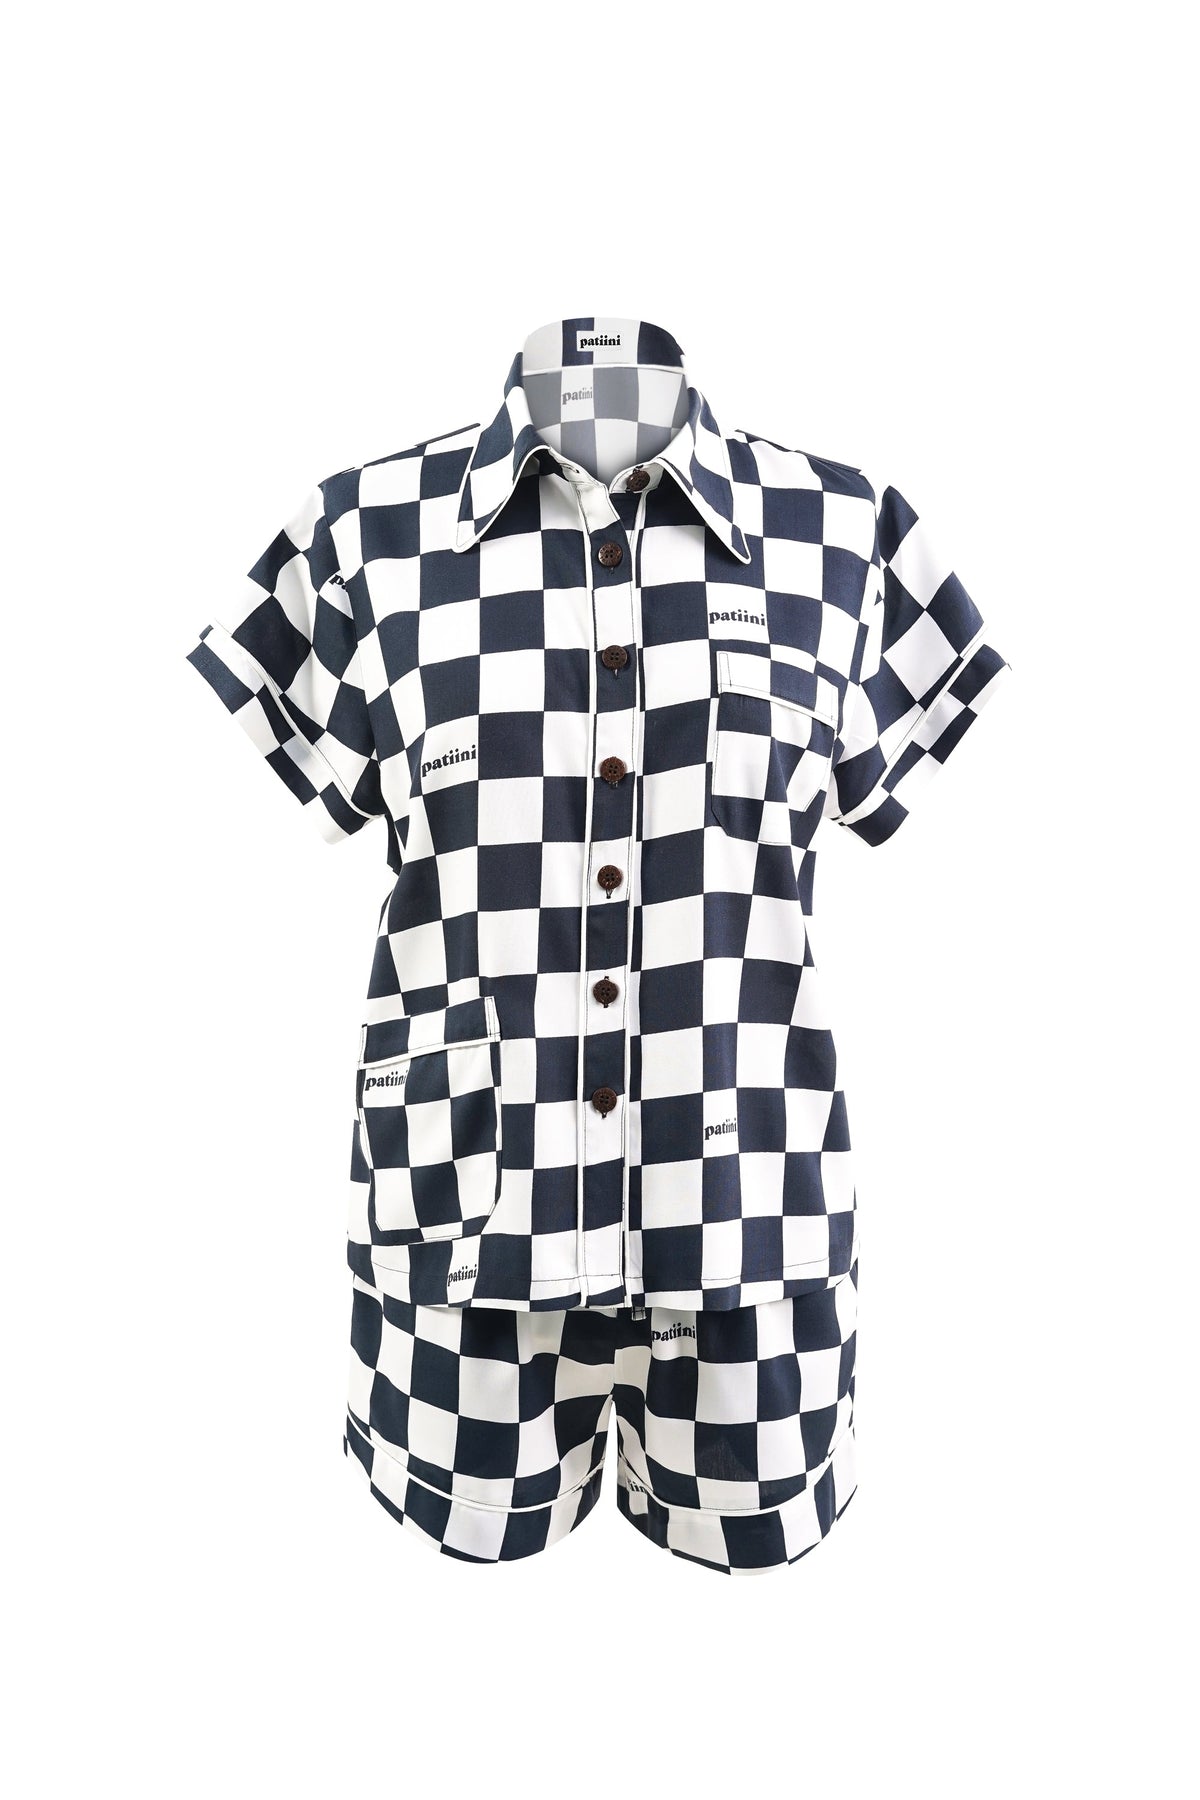 Black and white checkered short-sleeve pajamas with white piping.